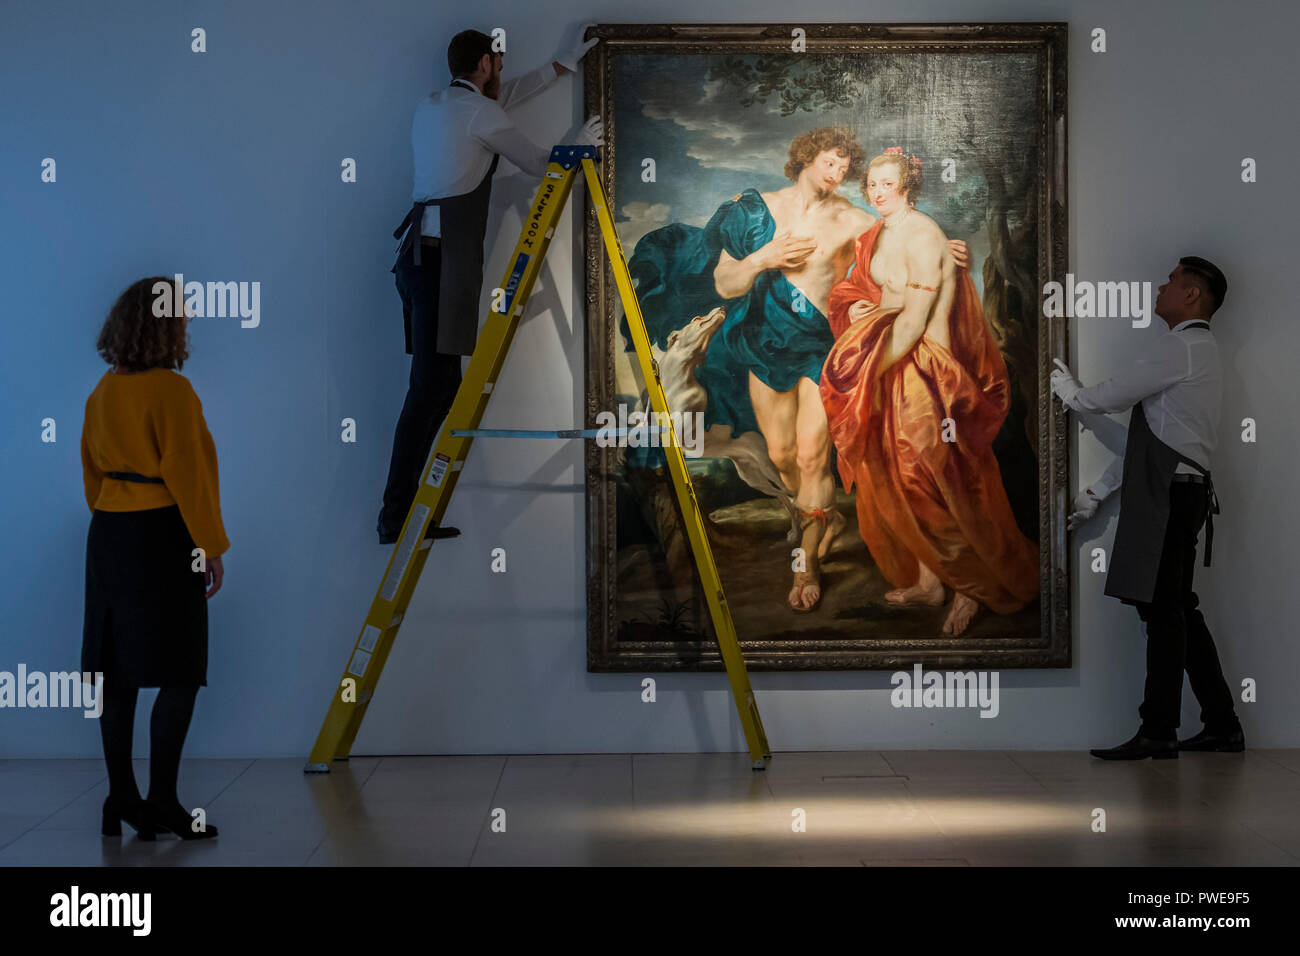 London, UK 16th Oct 2018Van Dyck, Venus and Adonis, est £2.5-3.5m - A preview of a two-part sale of  The Eric Albada Jelgersma Collection of Golden Age Dutch and Flemish picturesin London on 6 & 7 December. Stock Photo